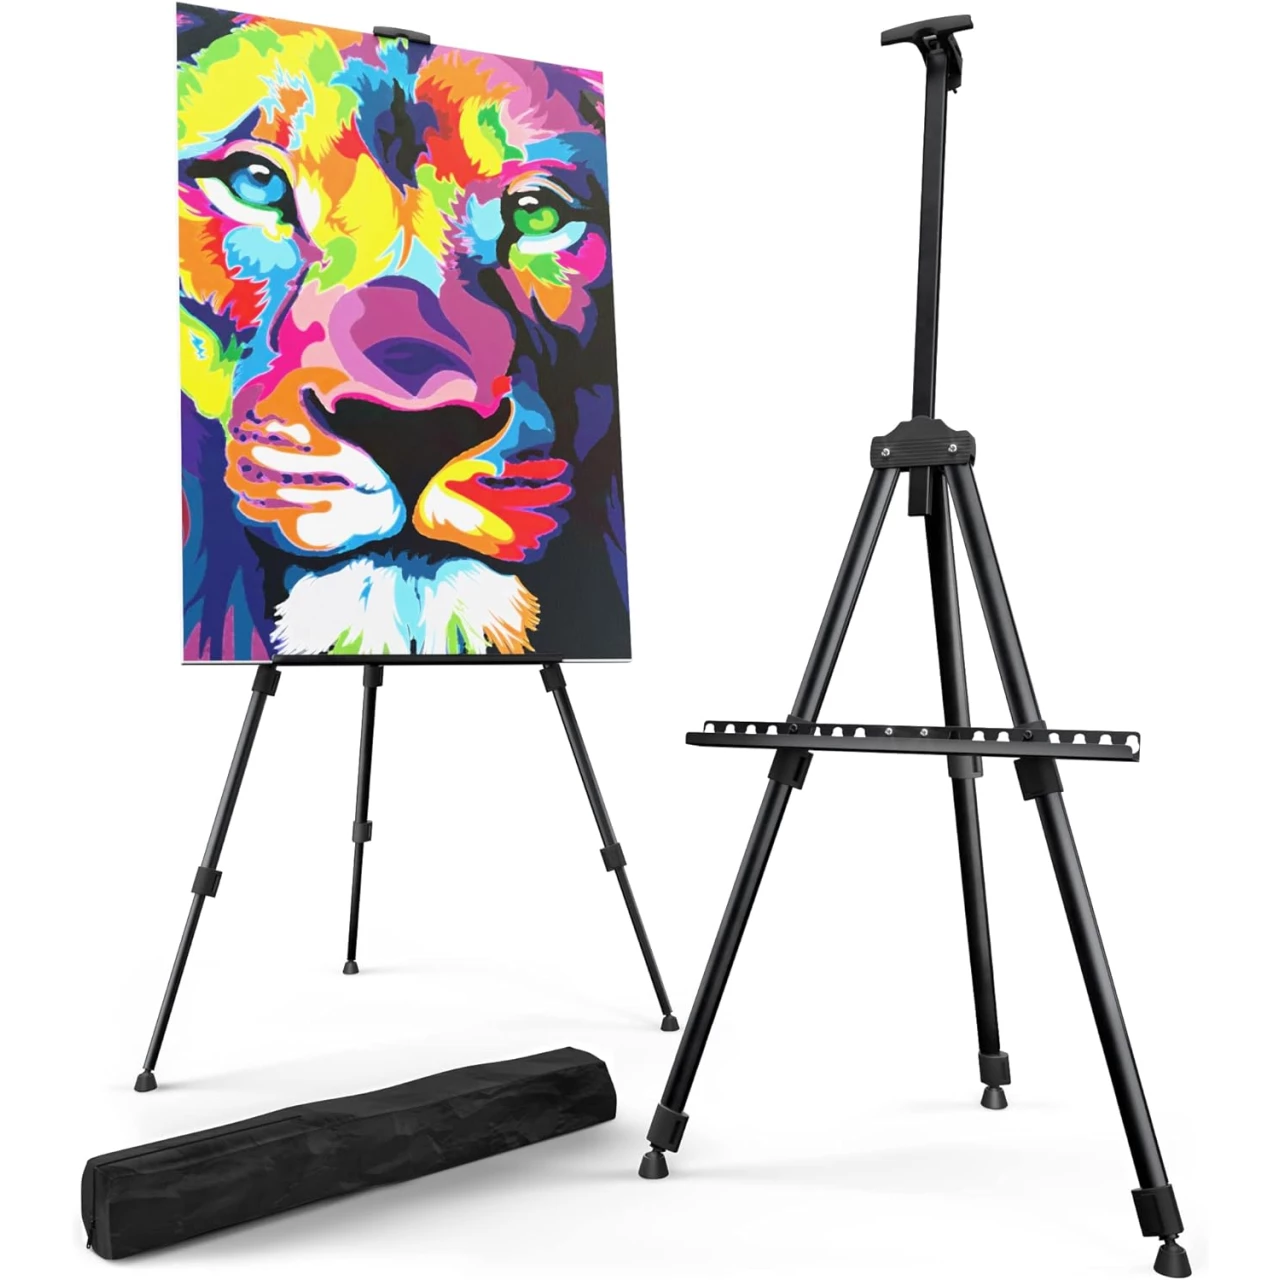 Portable Artist Easel Stand - Adjustable Height Painting Easel with Bag - Table Top Art Drawing Easels for Painting Canvas, Wedding Signs &amp; Tabletop Easels for Display - Metal Tripod - 21x66 inches